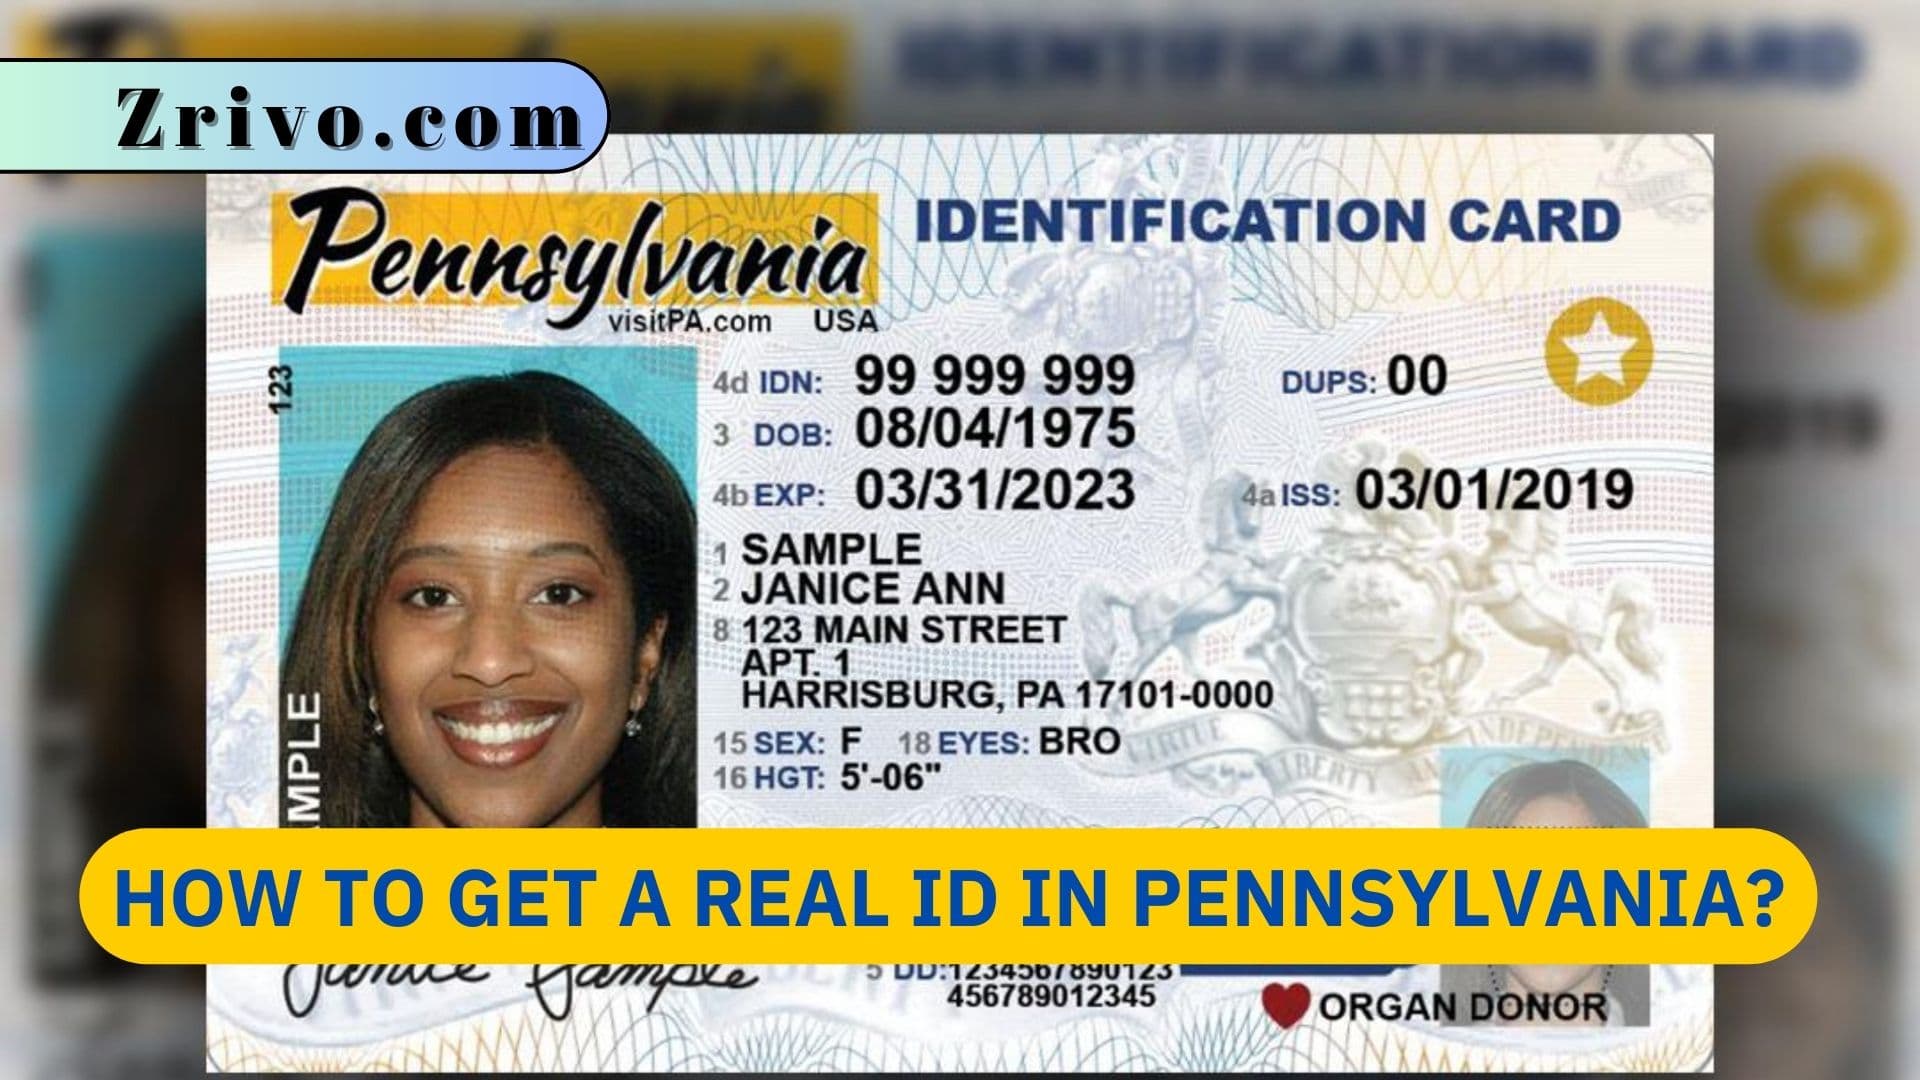 How to Get a Real ID in Pennsylvania